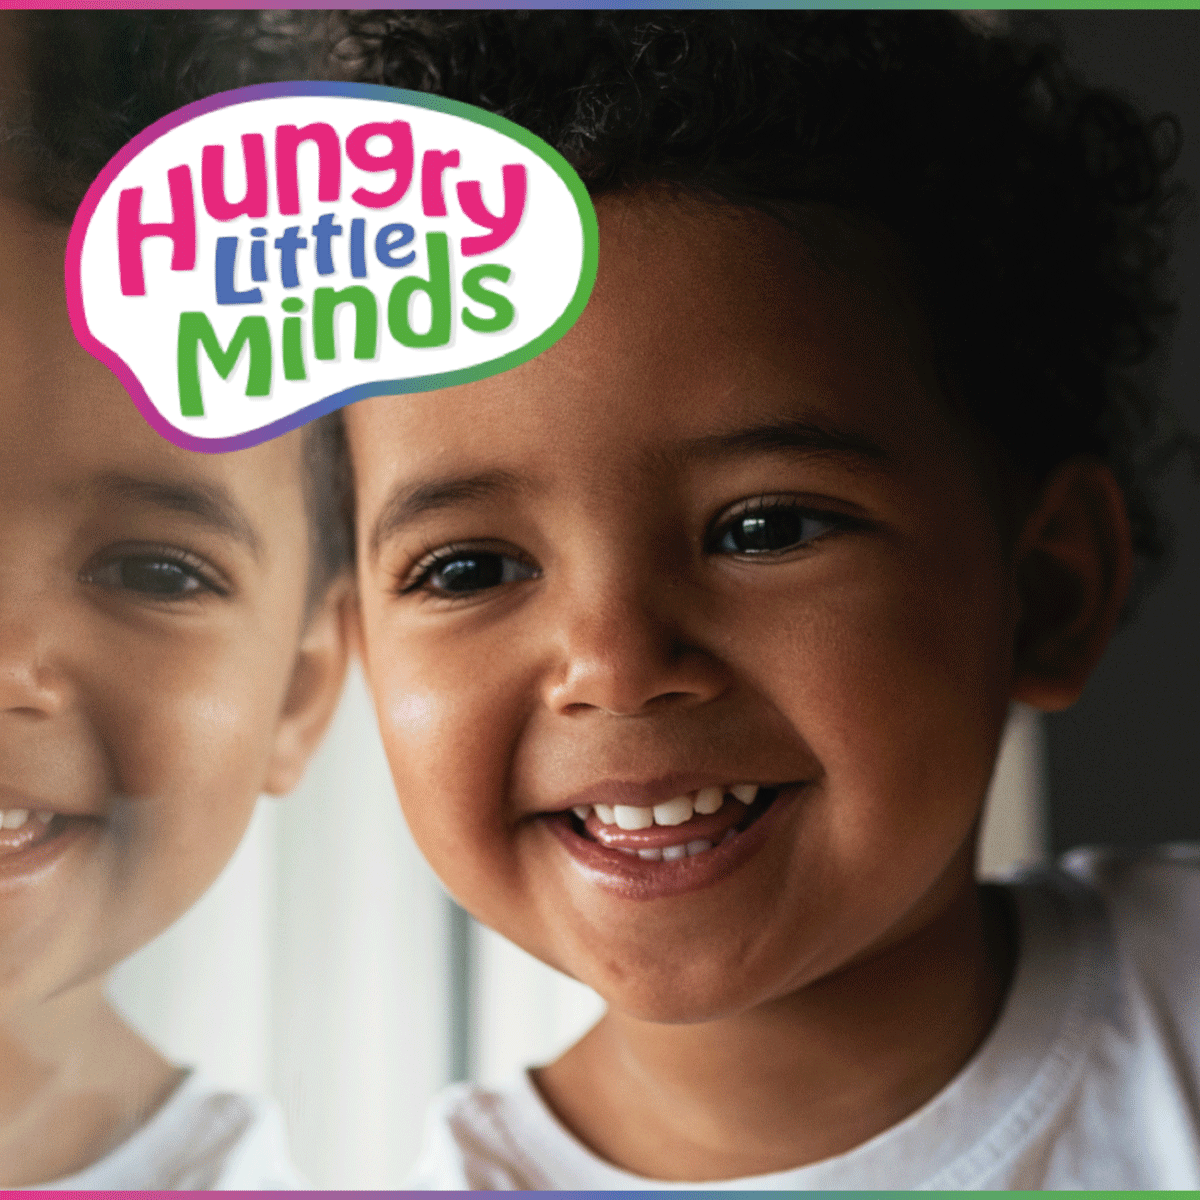 Today we welcome the launch of the new Department for Education campaign, Hungry Little Minds. See how they are aiming to encourage parents to boost their children’s language and literacy development with fun, everyday activities at: hungrylittleminds.campaign.gov.uk  #hungrylittleminds